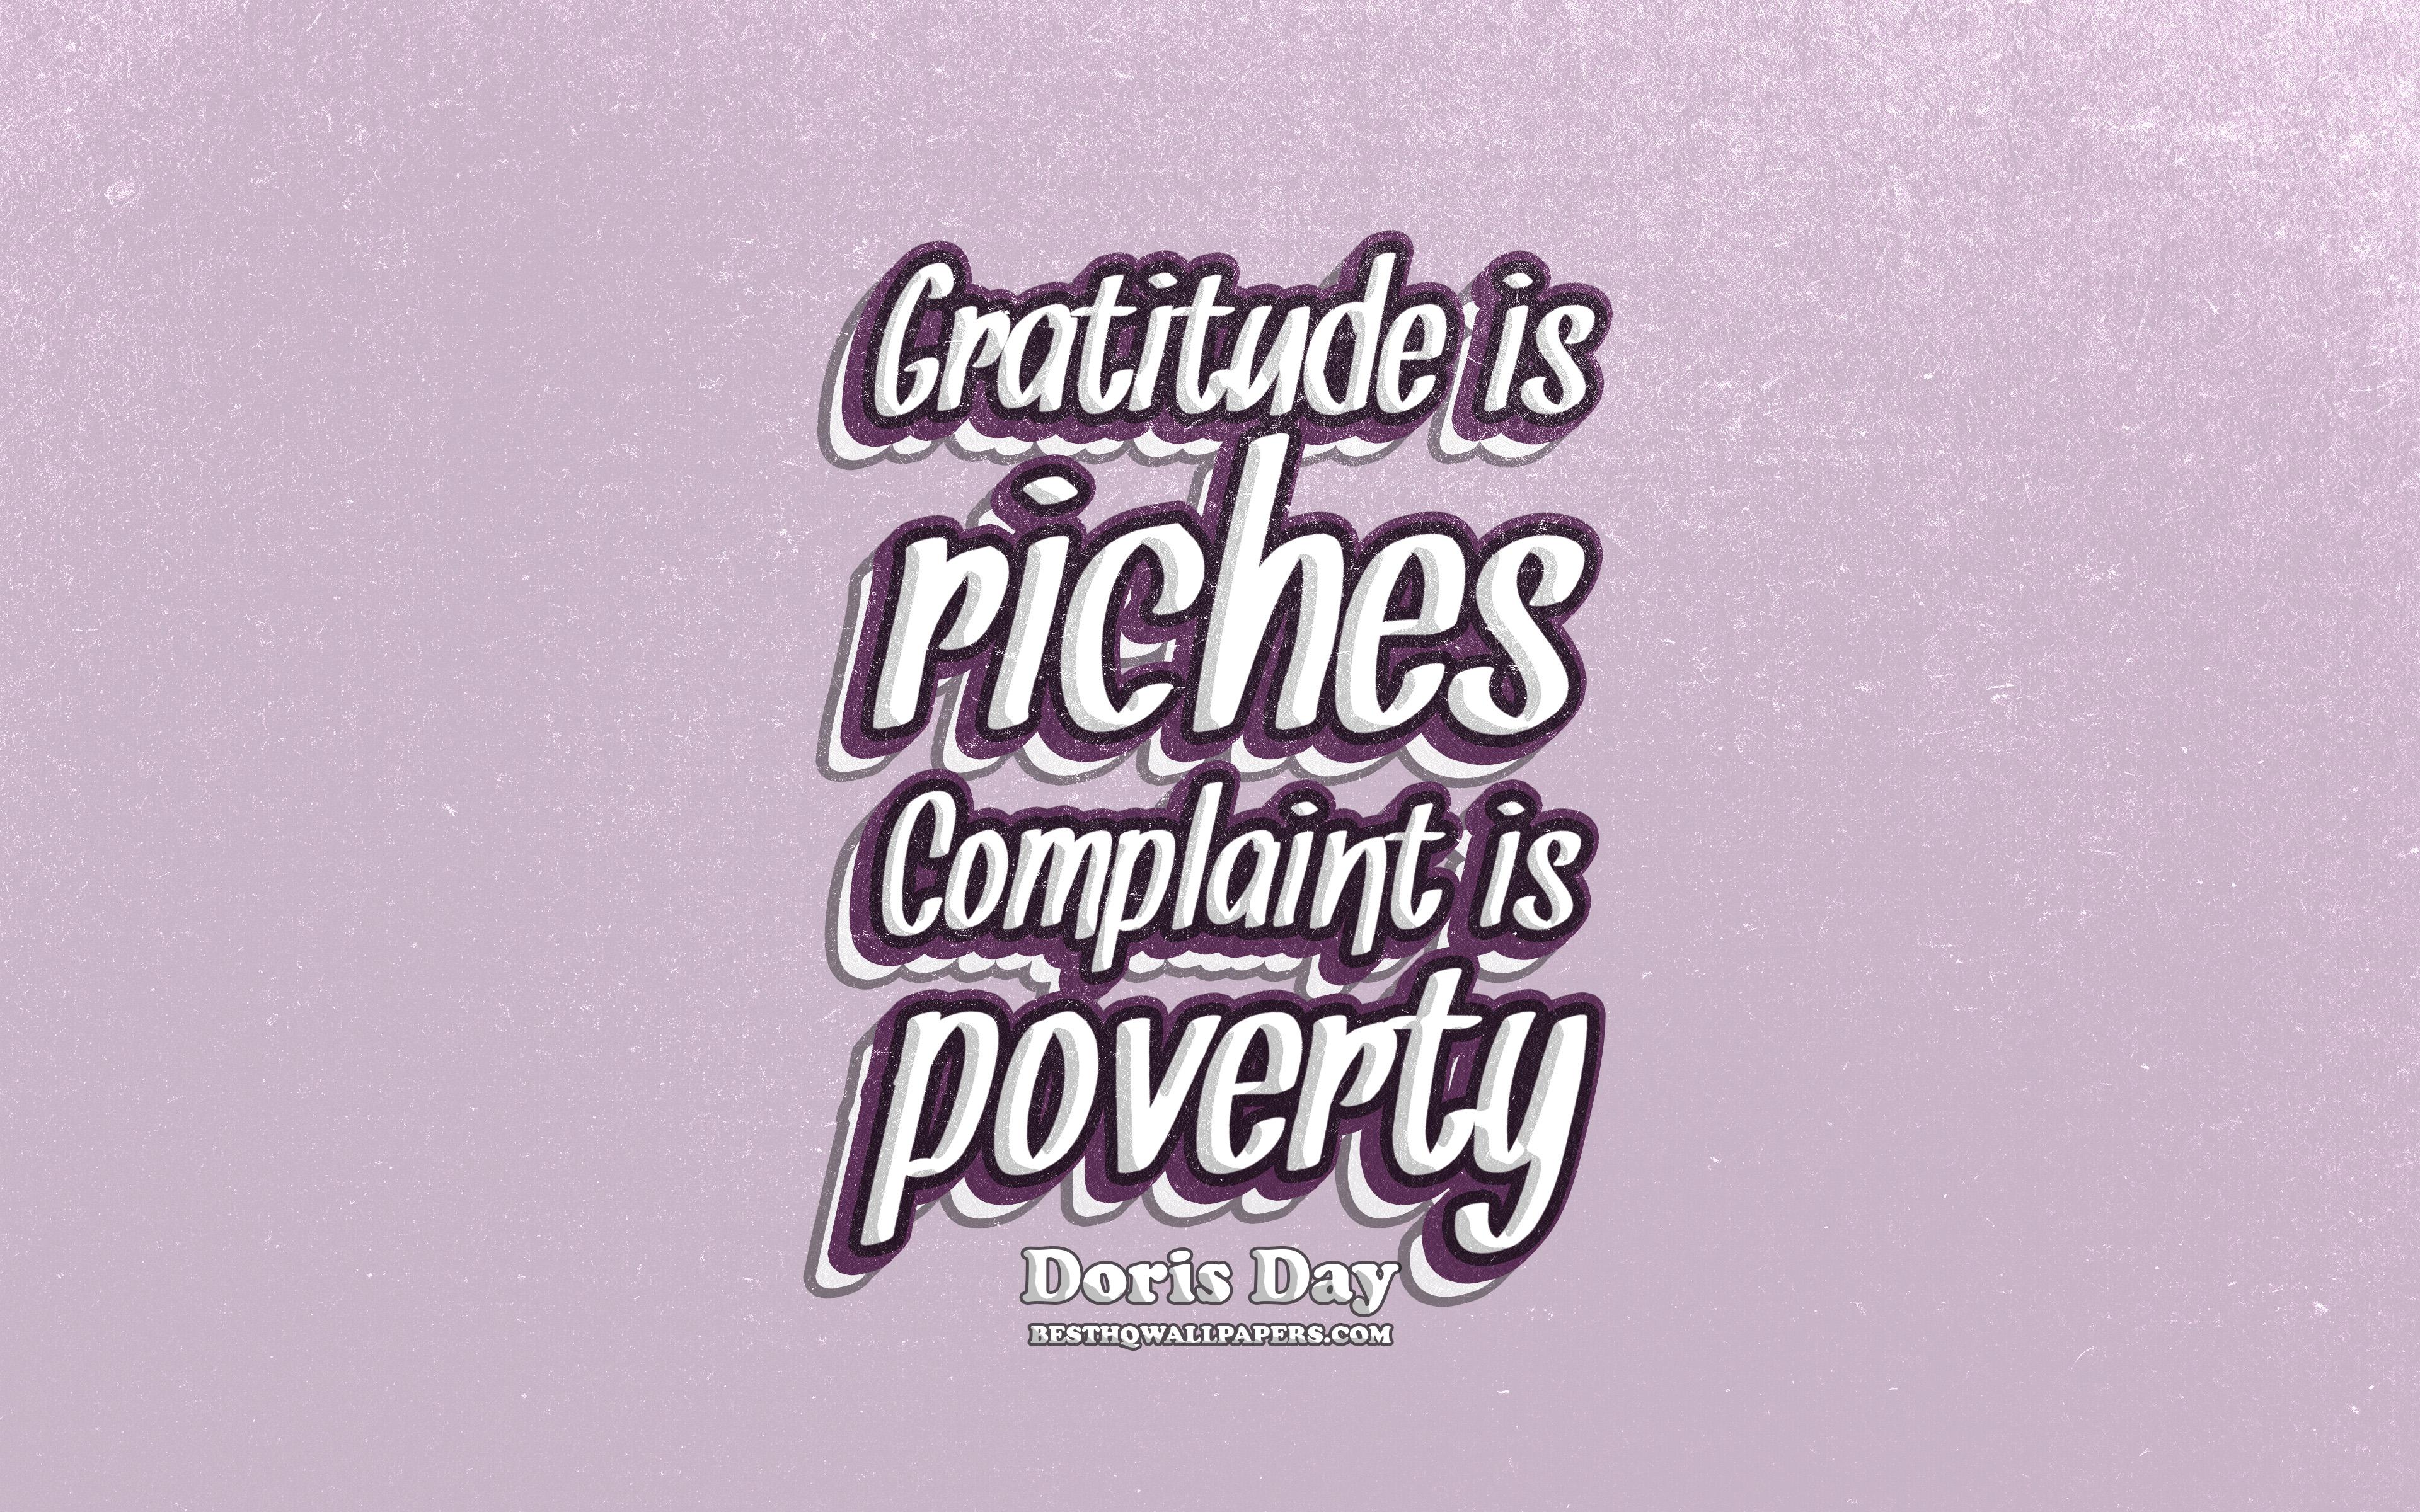 Download wallpaper 4k, Gratitude is riches Complaint is poverty